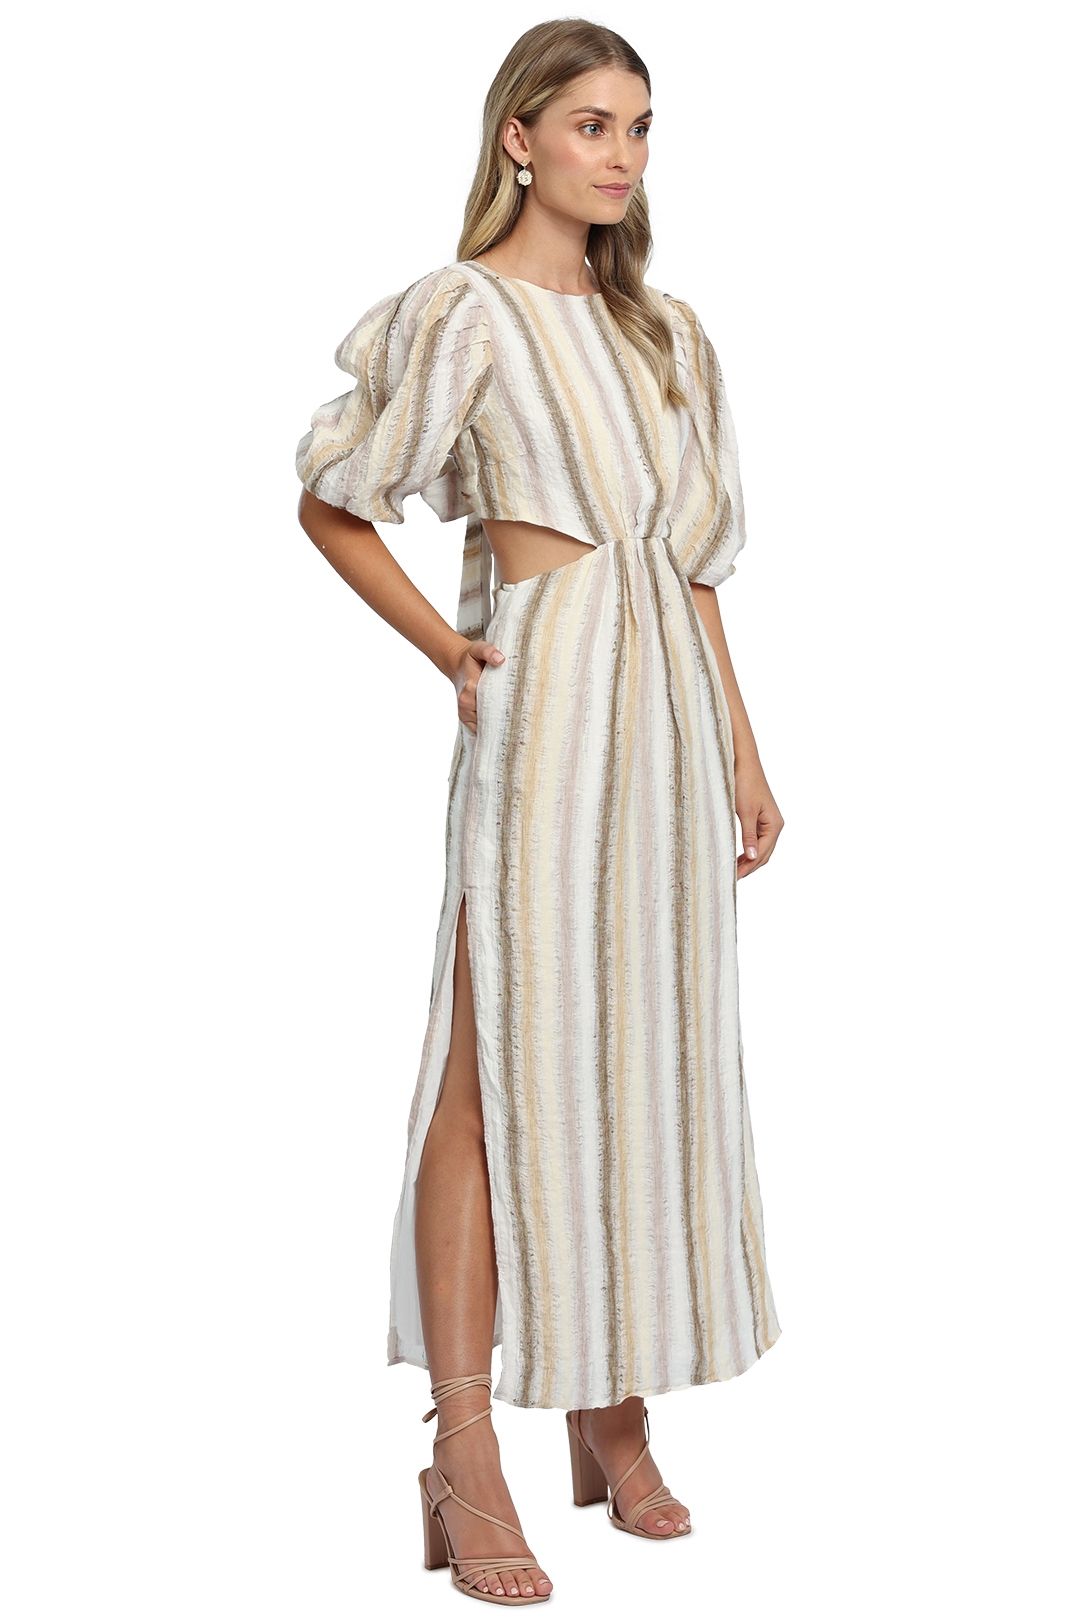 Ministry of Style Seventies Soul Stripe Maxi Dress crew